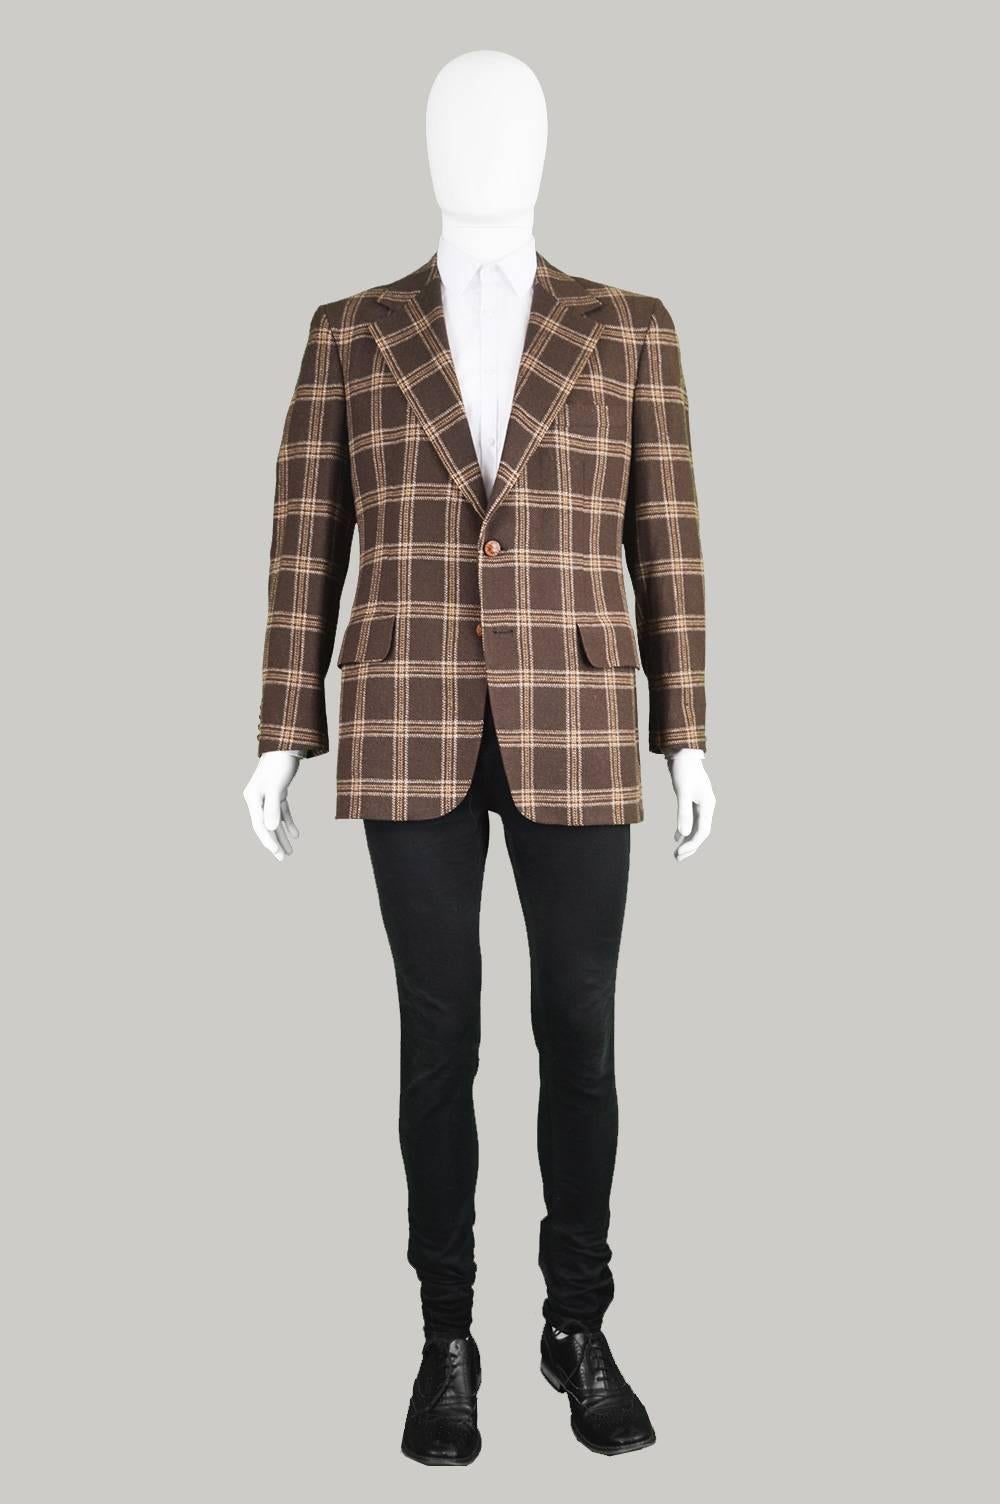 A sophisticated and superbly tailored vintage men's blazer/ sport coat by luxury French label, Lanvin. In a luxurious, brown camel hair fabric woven in Scotland with a classic checked/ plaid pattern throughout. The 70s flair and eccentricity of this